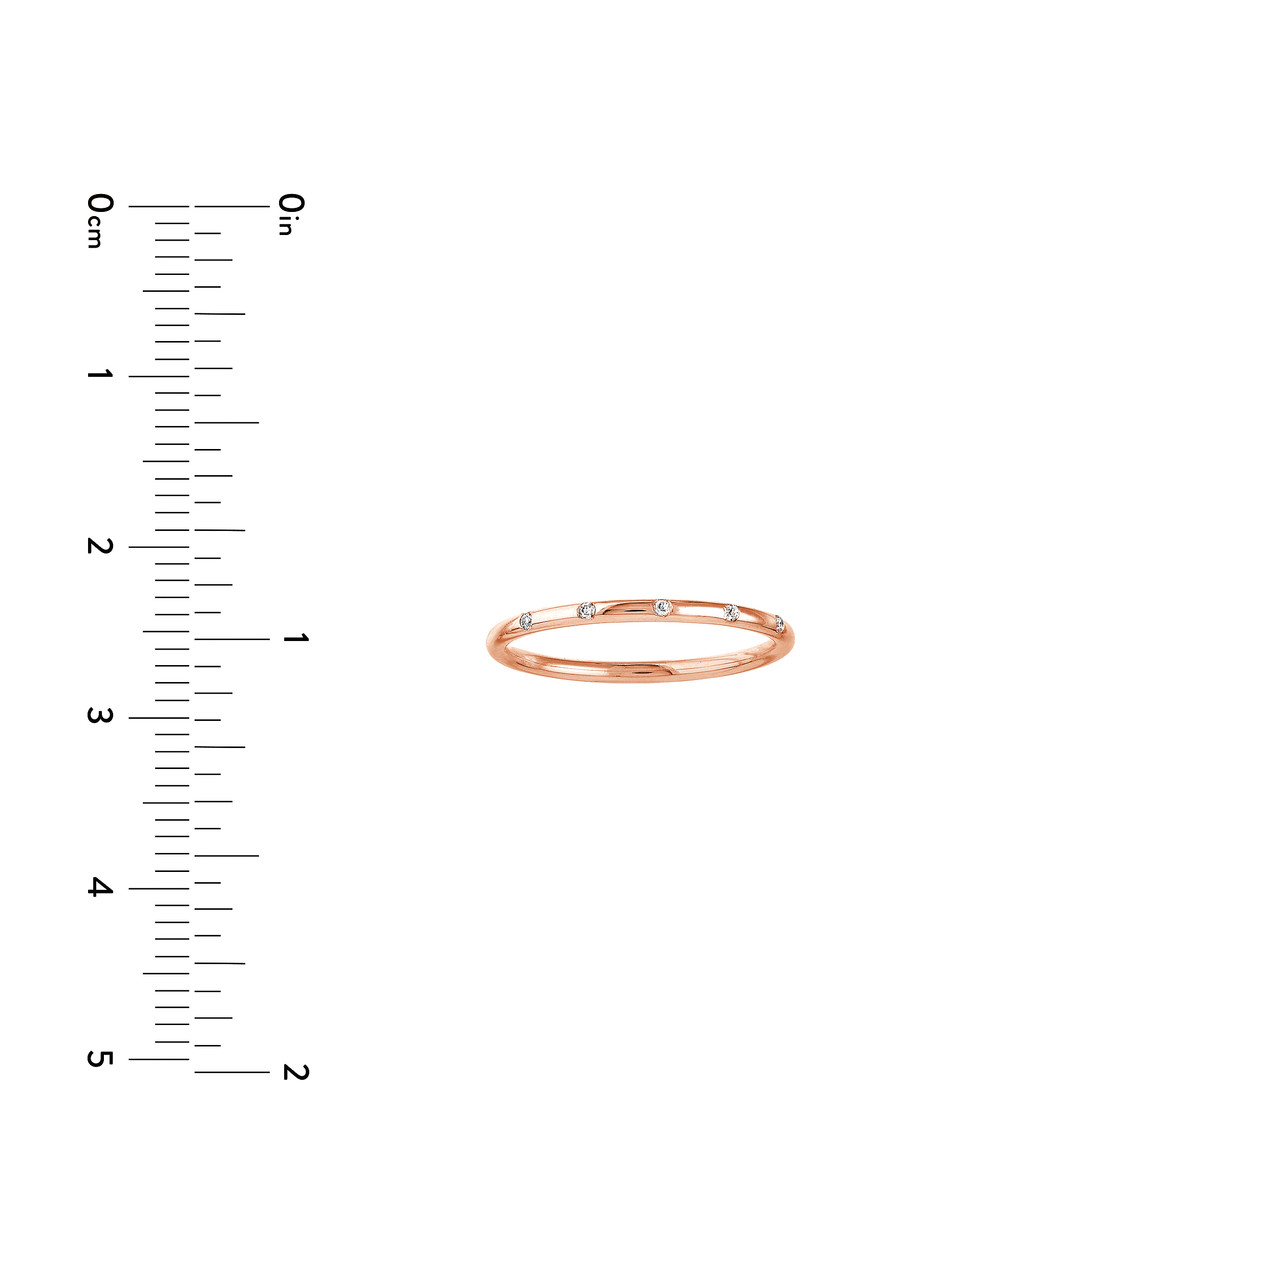 WHP Jewellers 2 gm, 23KT Yellow Gold Vedhani Ring : Amazon.in: Fashion